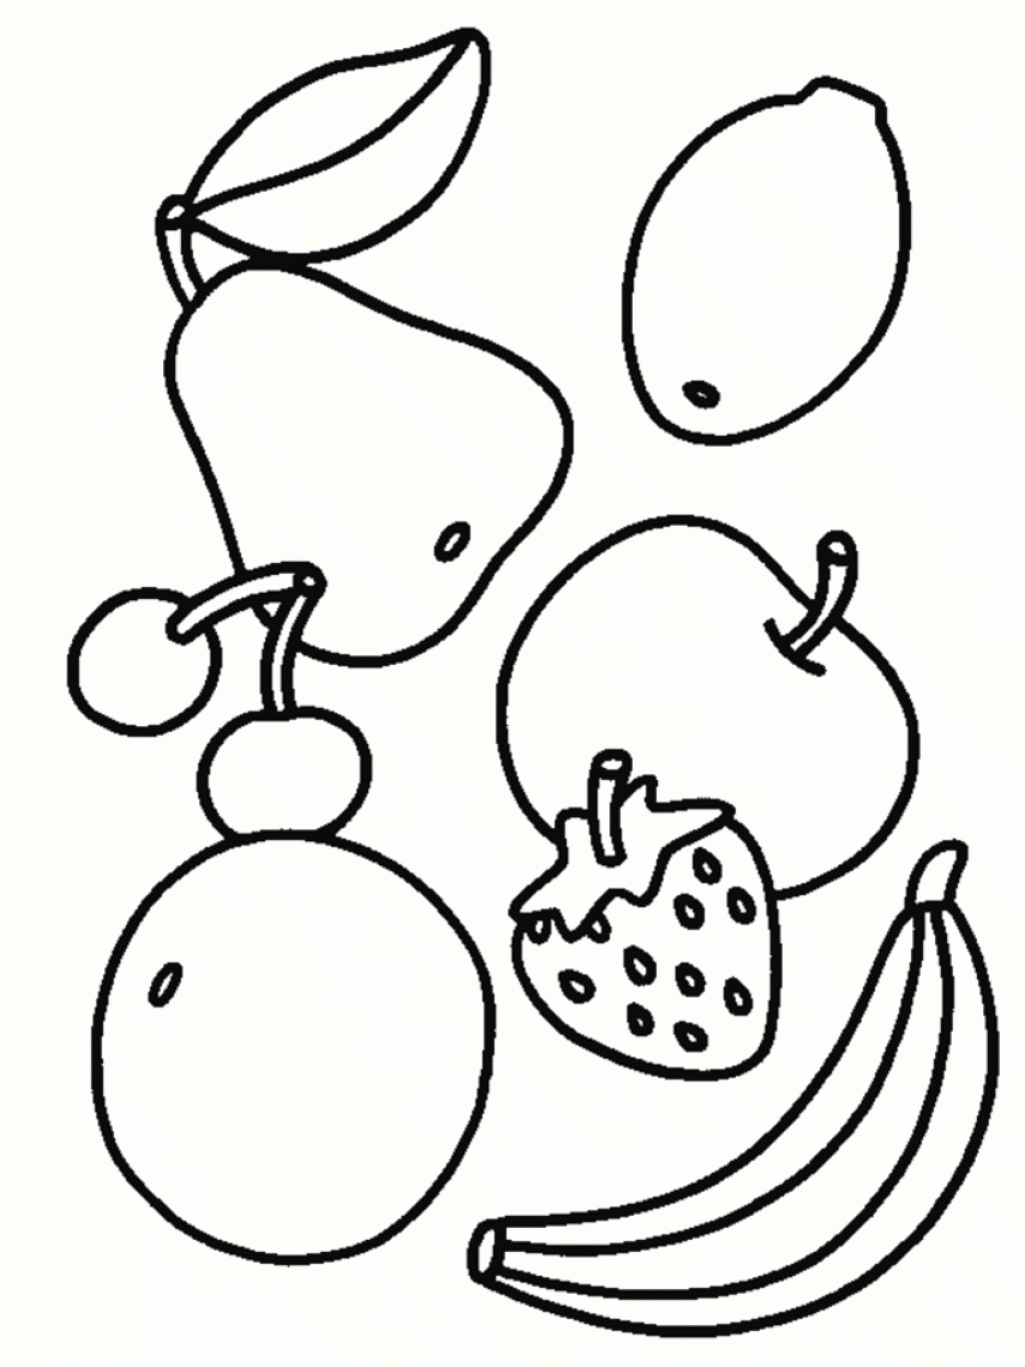 Food Coloring Pages 3 Kids Fruits Vegetables Coloring Pages ...